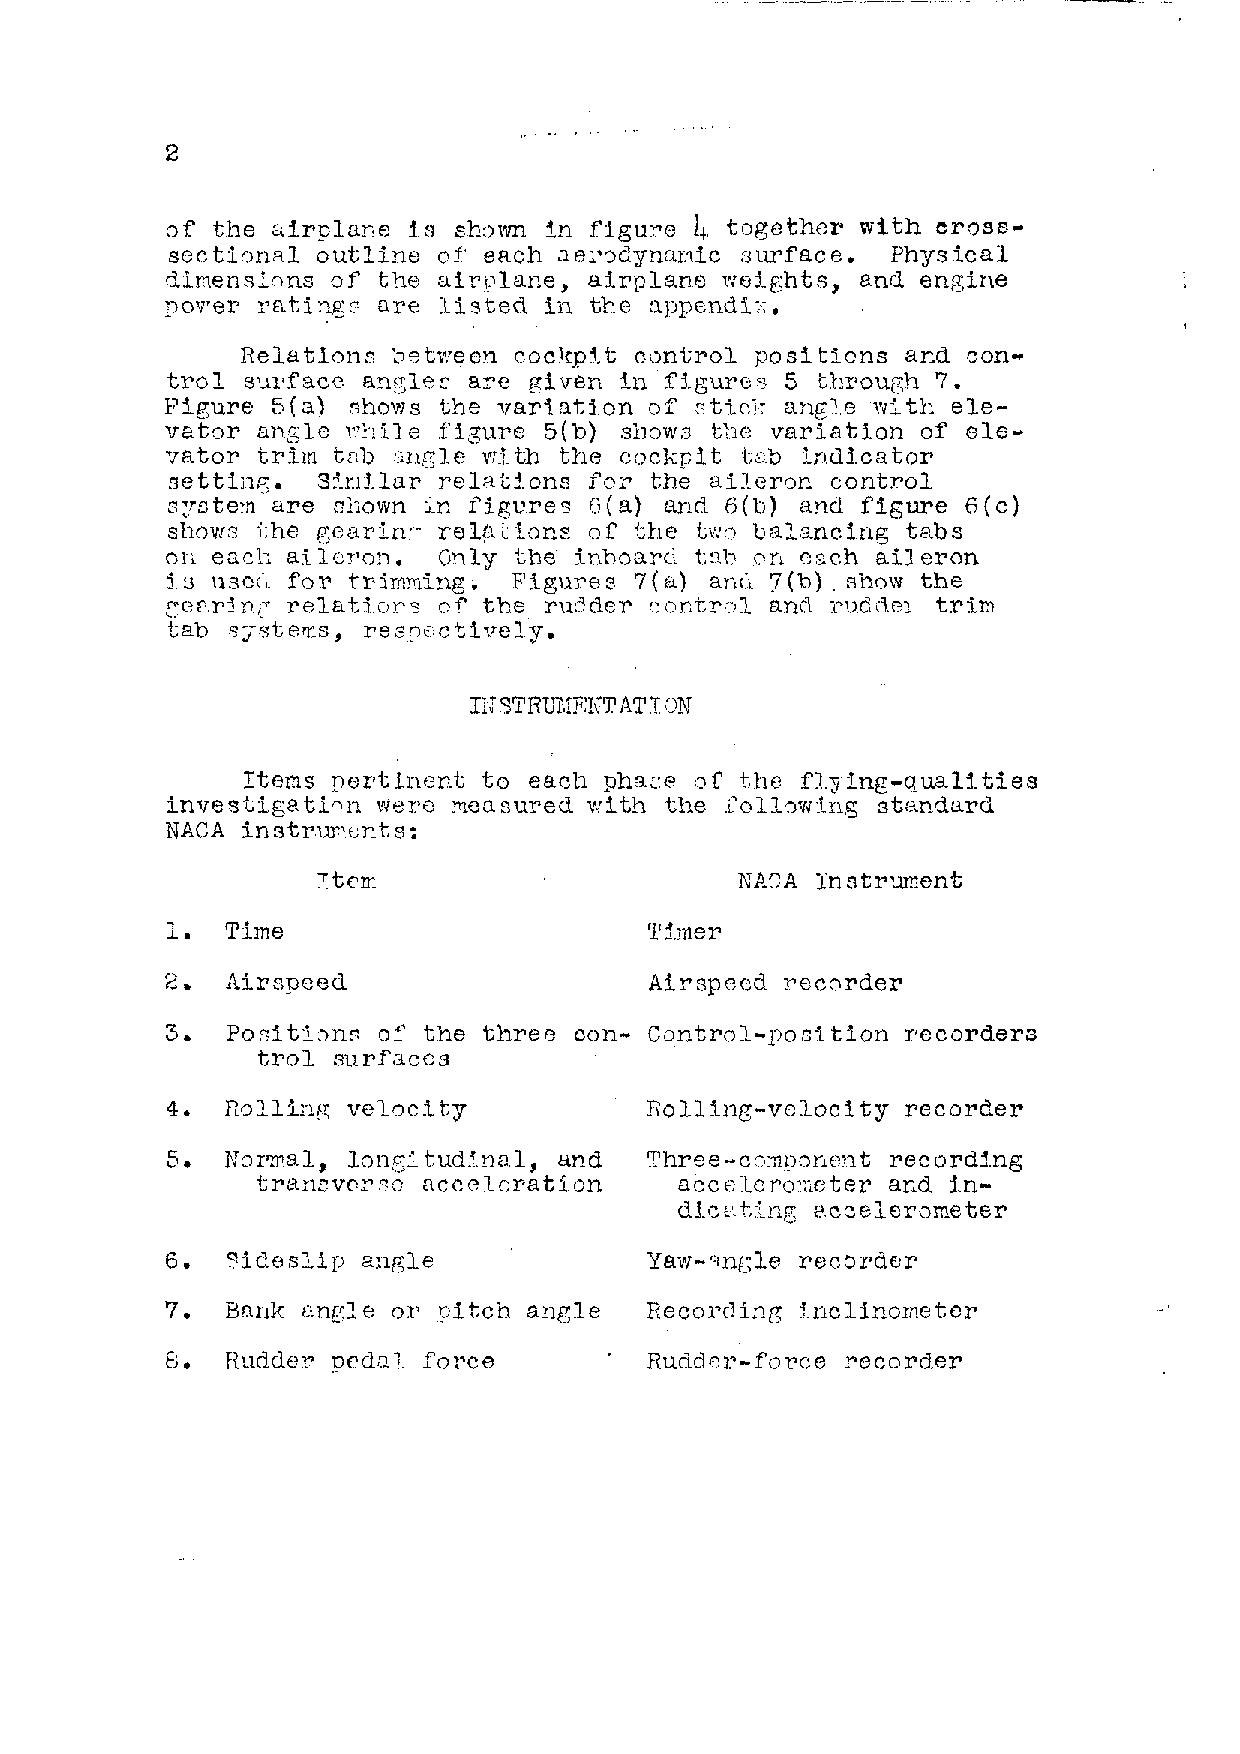 Sample page 2 from AirCorps Library document: Memorandum Report on the Flying Qualities of the Bell P-39D-1